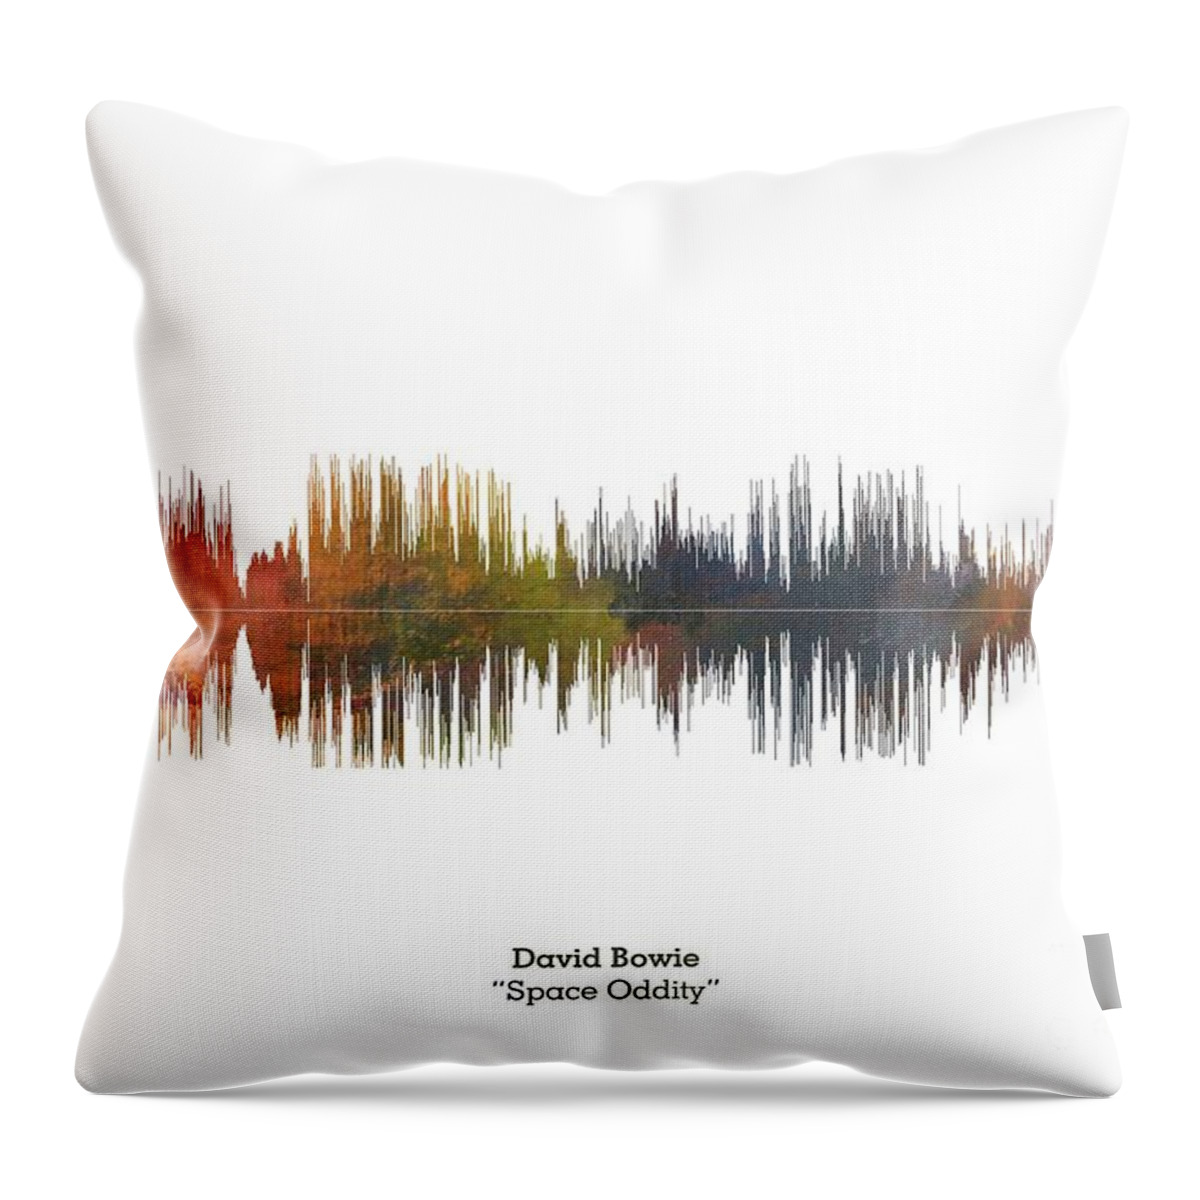 Music Poster Throw Pillow featuring the digital art LAB NO 4 David Bowie Space Oddity Song Soundwave Print Music Lyrics Poster #1 by Lab No 4 The Quotography Department